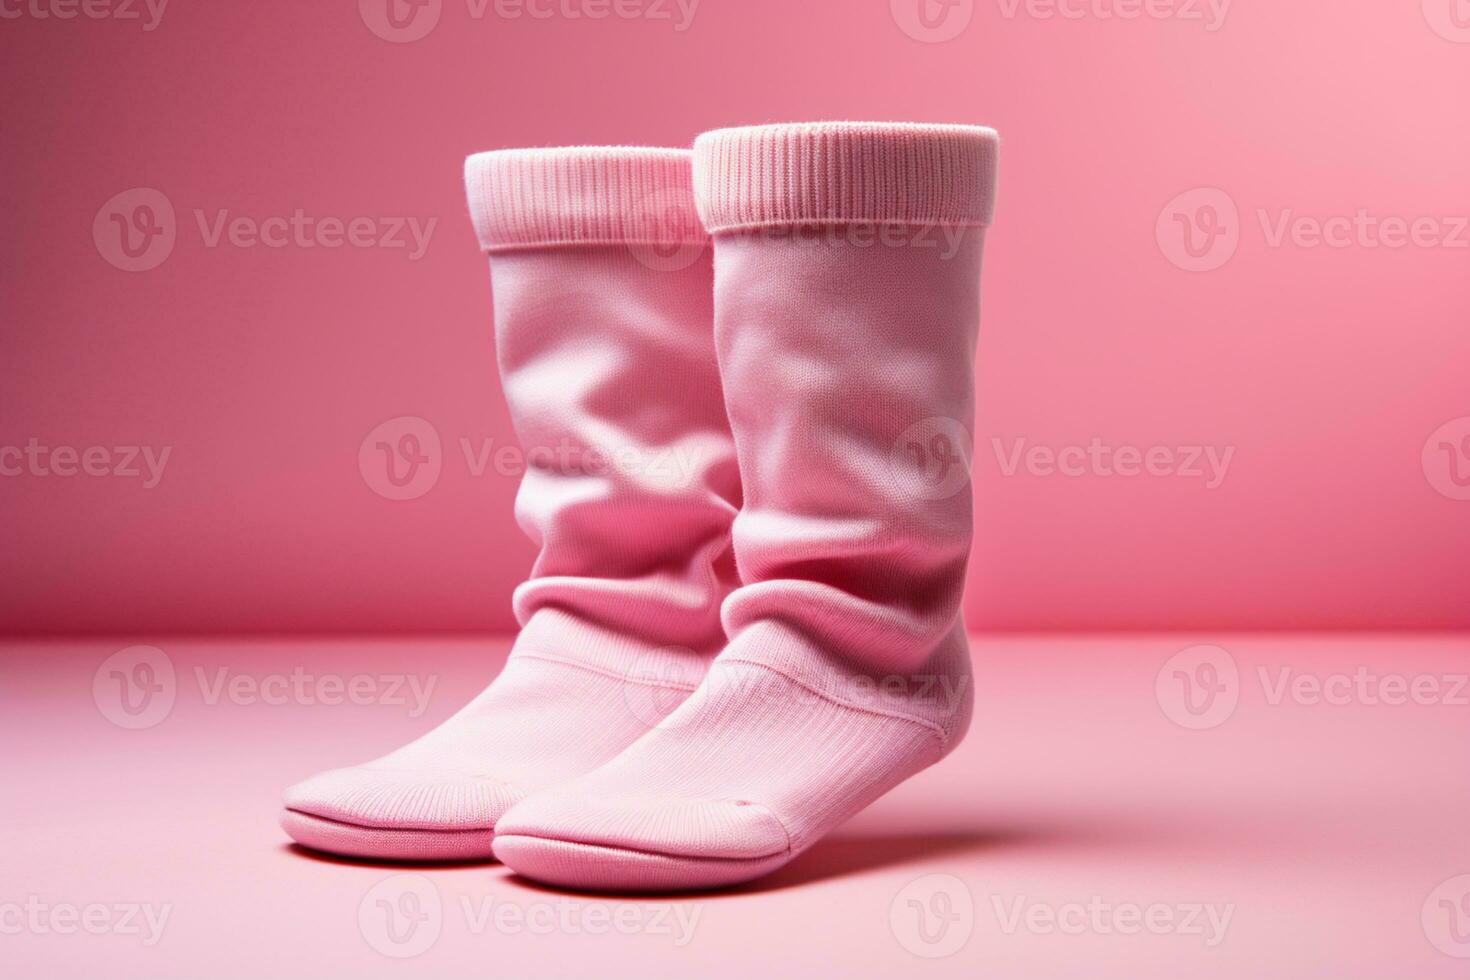 Adorable socks on pink backdrop create space for your sweet baby related sentiments AI Generated photo